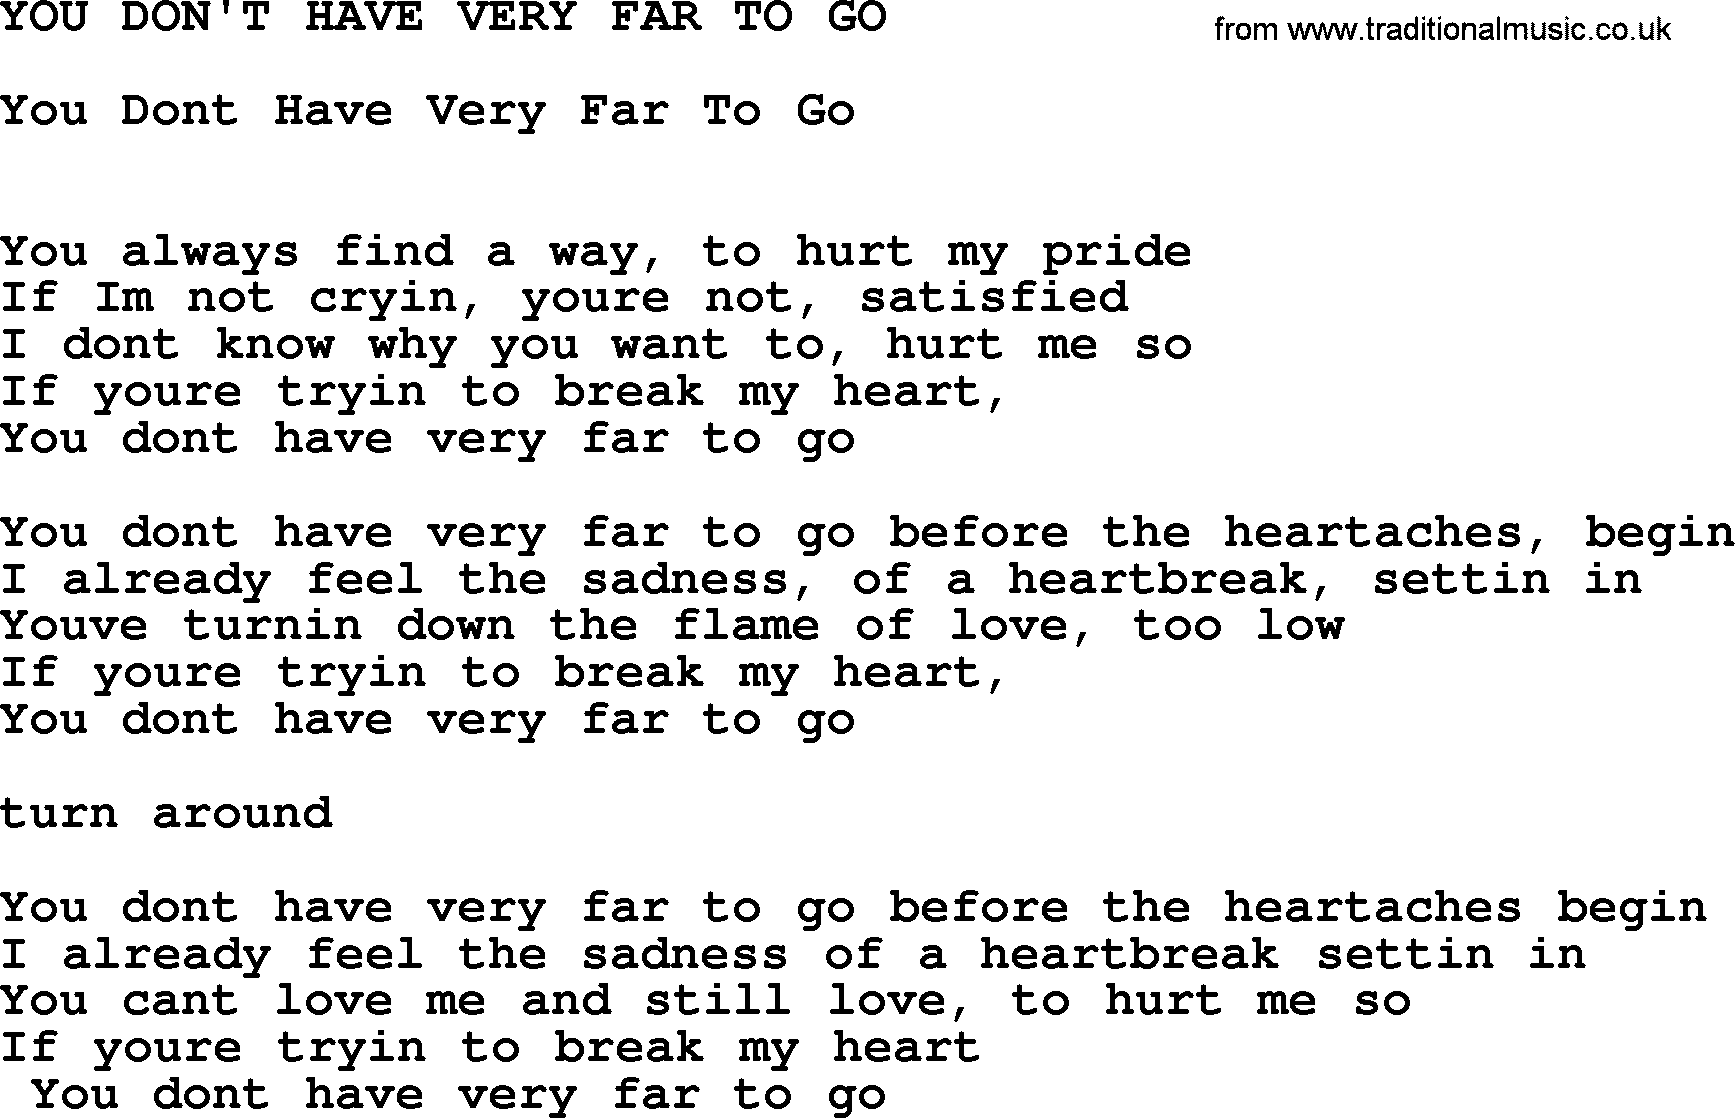 Merle Haggard song: You Don't Have Very Far To Go, lyrics.